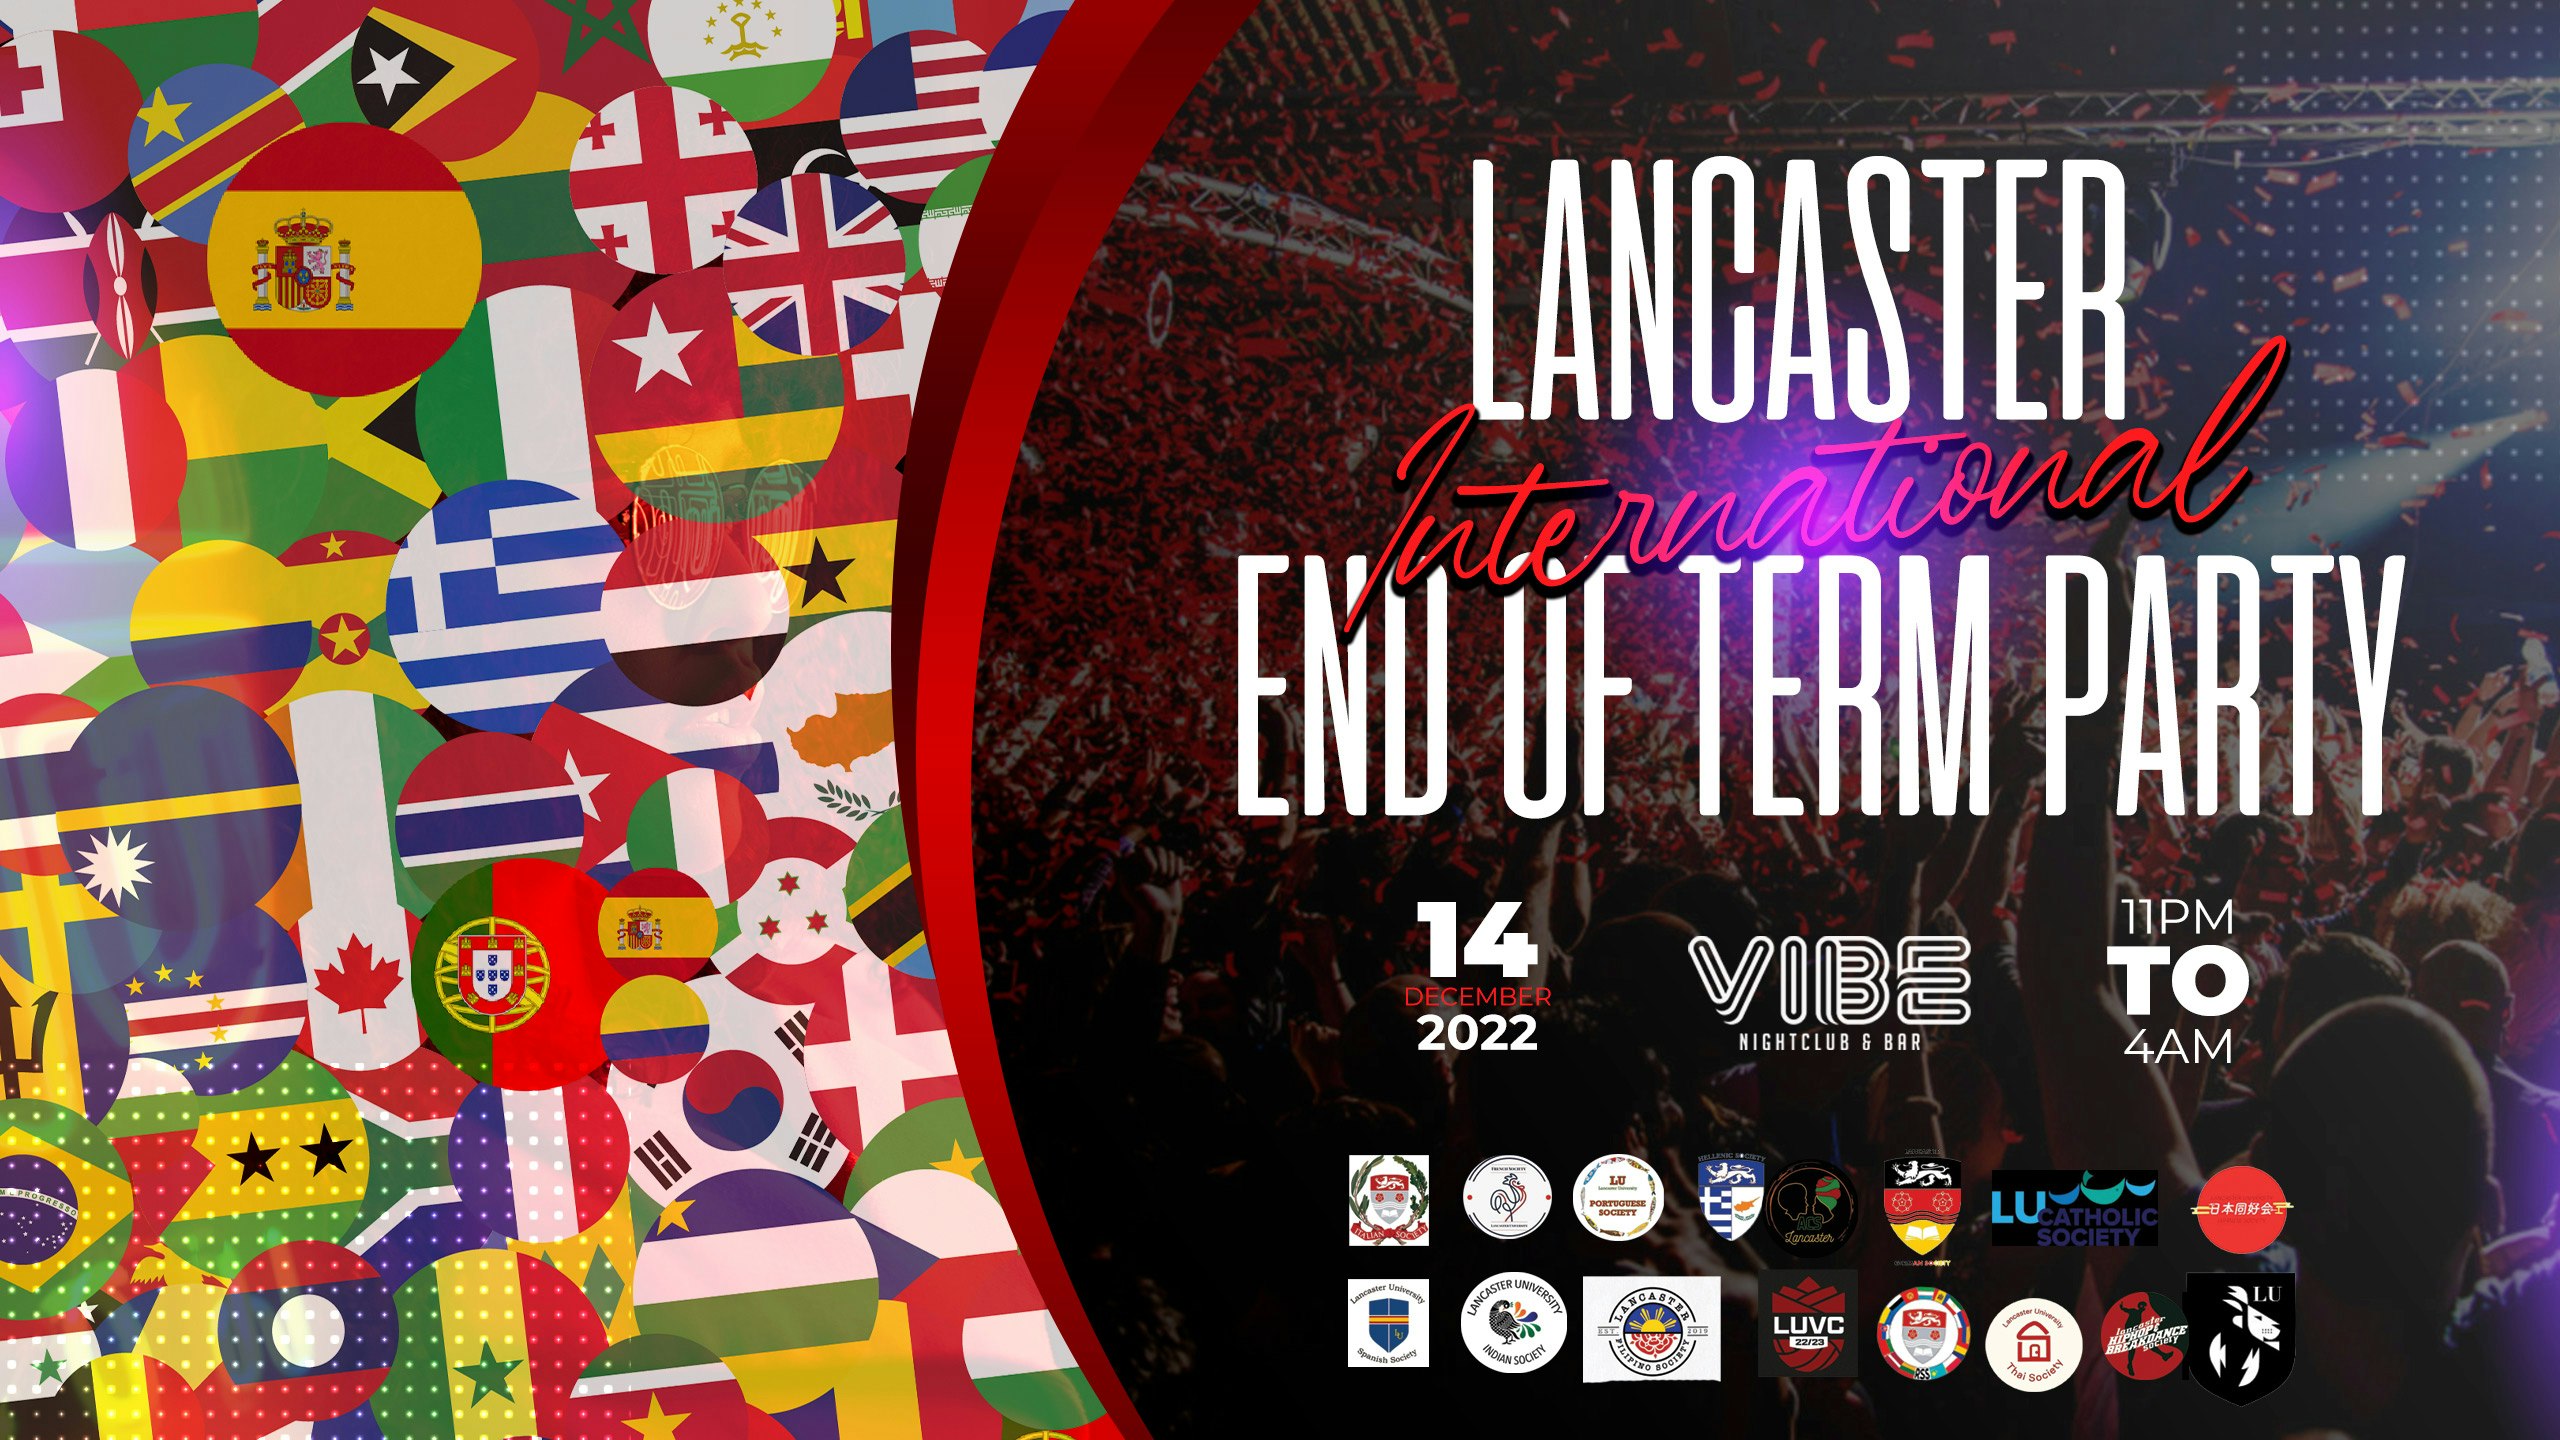 International End of Term Party Lancaster – Wednesday 14th December